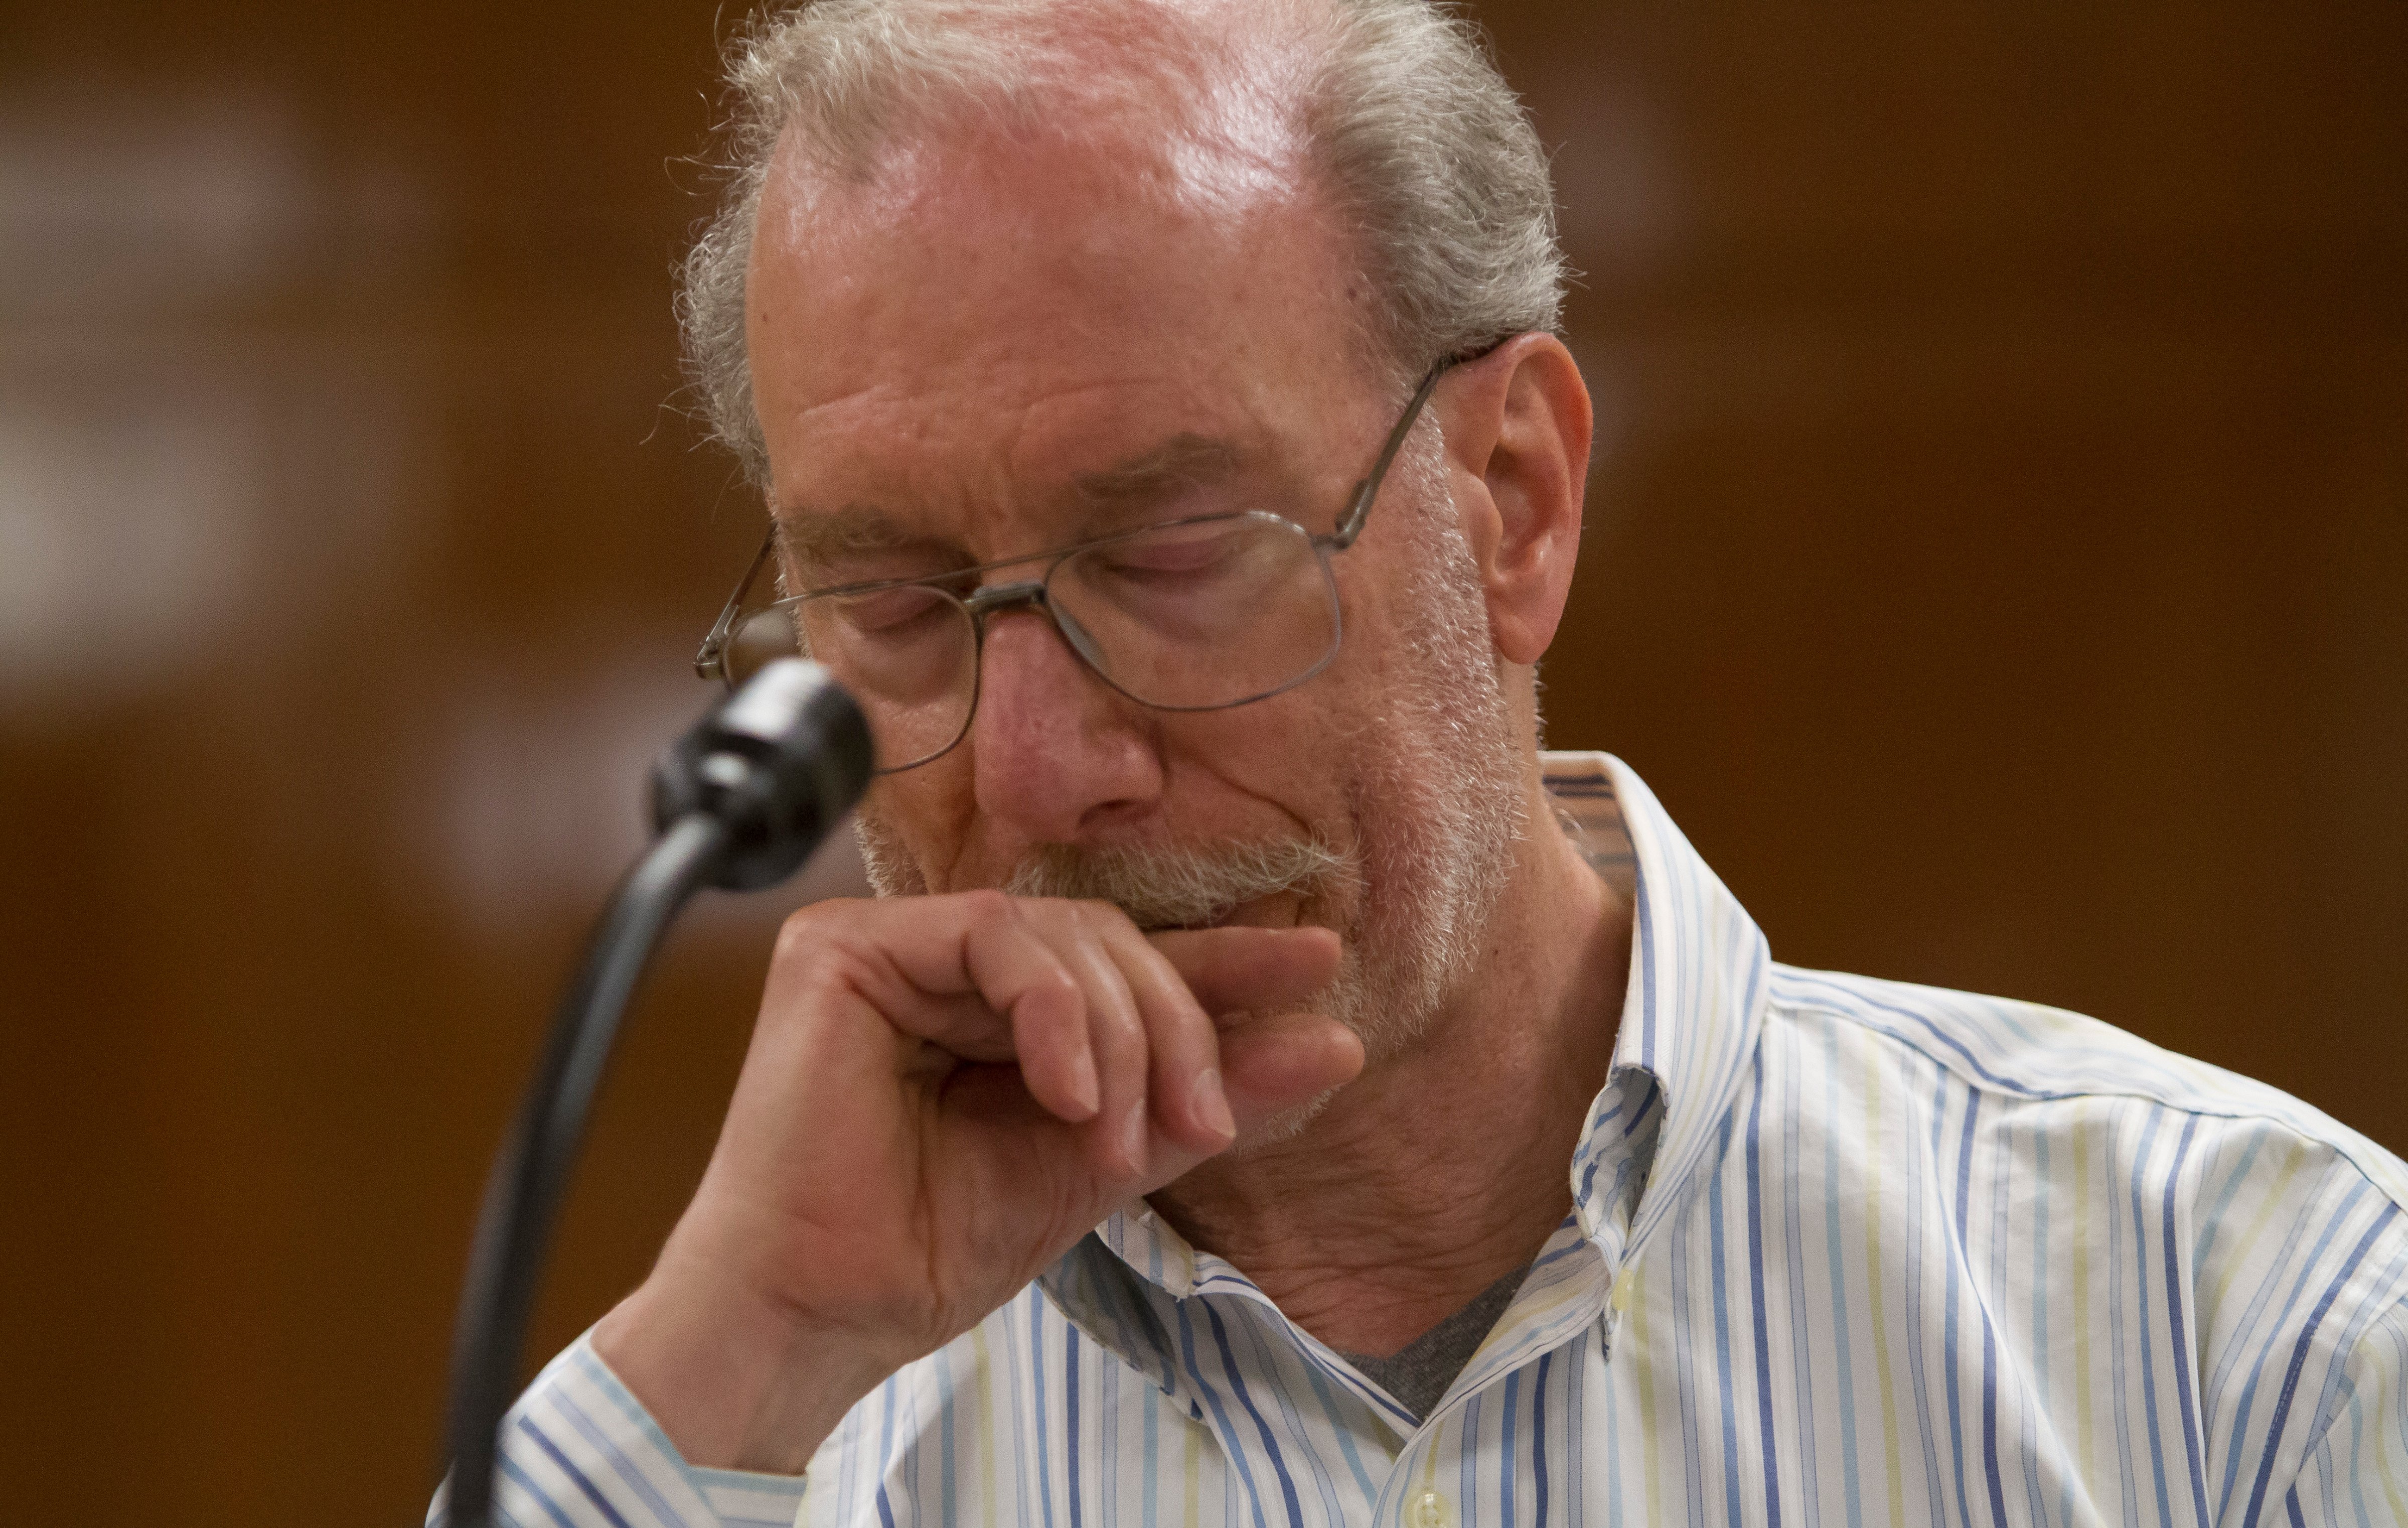 Stanley Patz, father of Etan Patz, pauses during a news conference, after a judge declared a mistrial for Pedro Hernandez at Manhattan Supreme Court in New York on May 8, 2015. (Bebeto Matthews—AP)